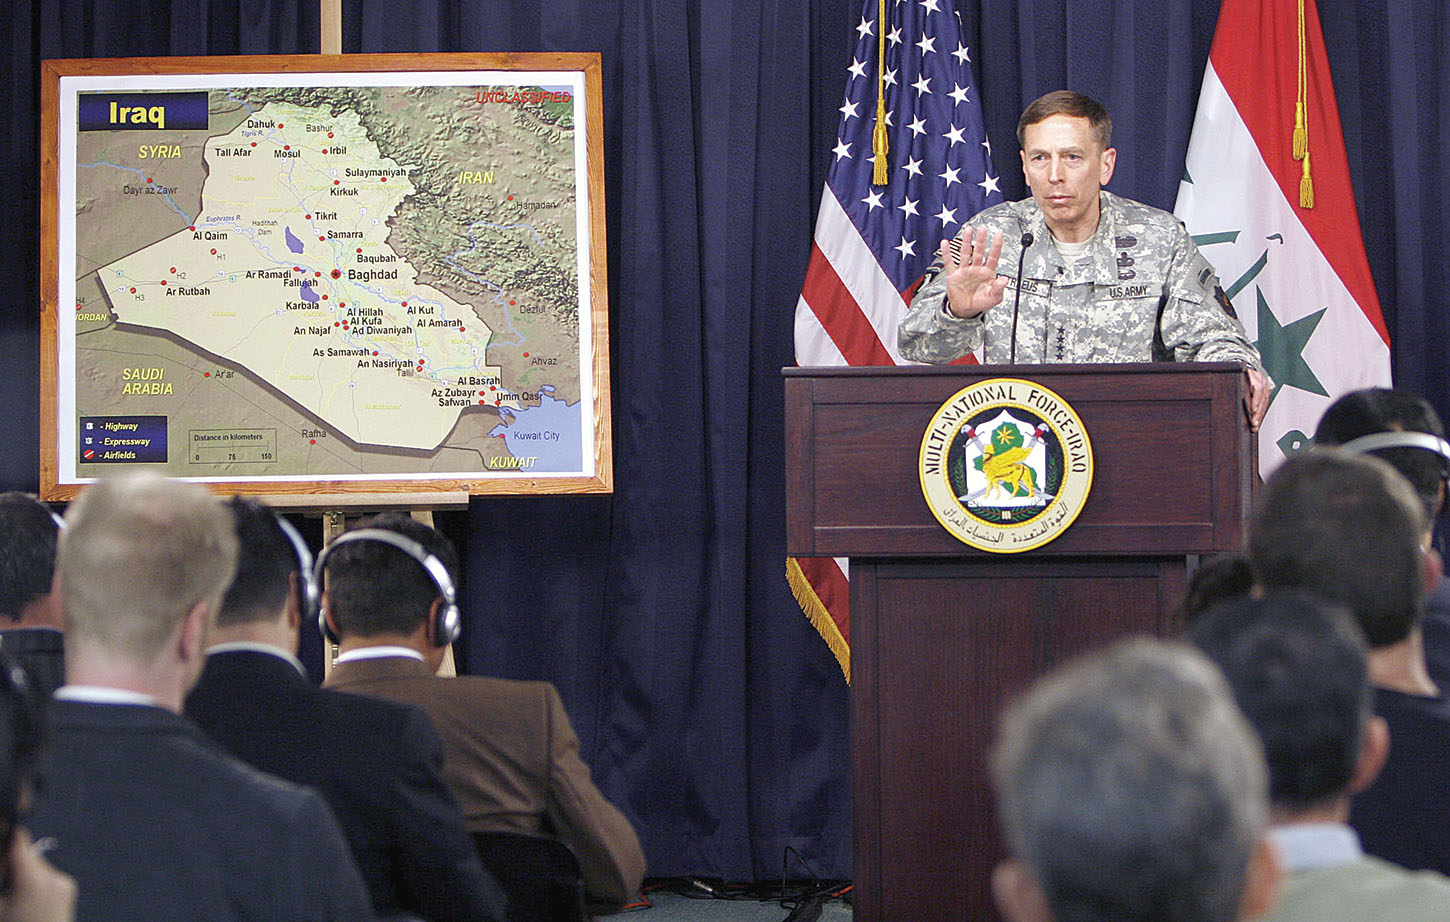 Gen. David Petraeus discusses insurgents in Iraq during a news conference on March 8, 2007. Petraeus’ study of the Vietnam War while in graduate school influenced his strategy in Iraq. / AP photo